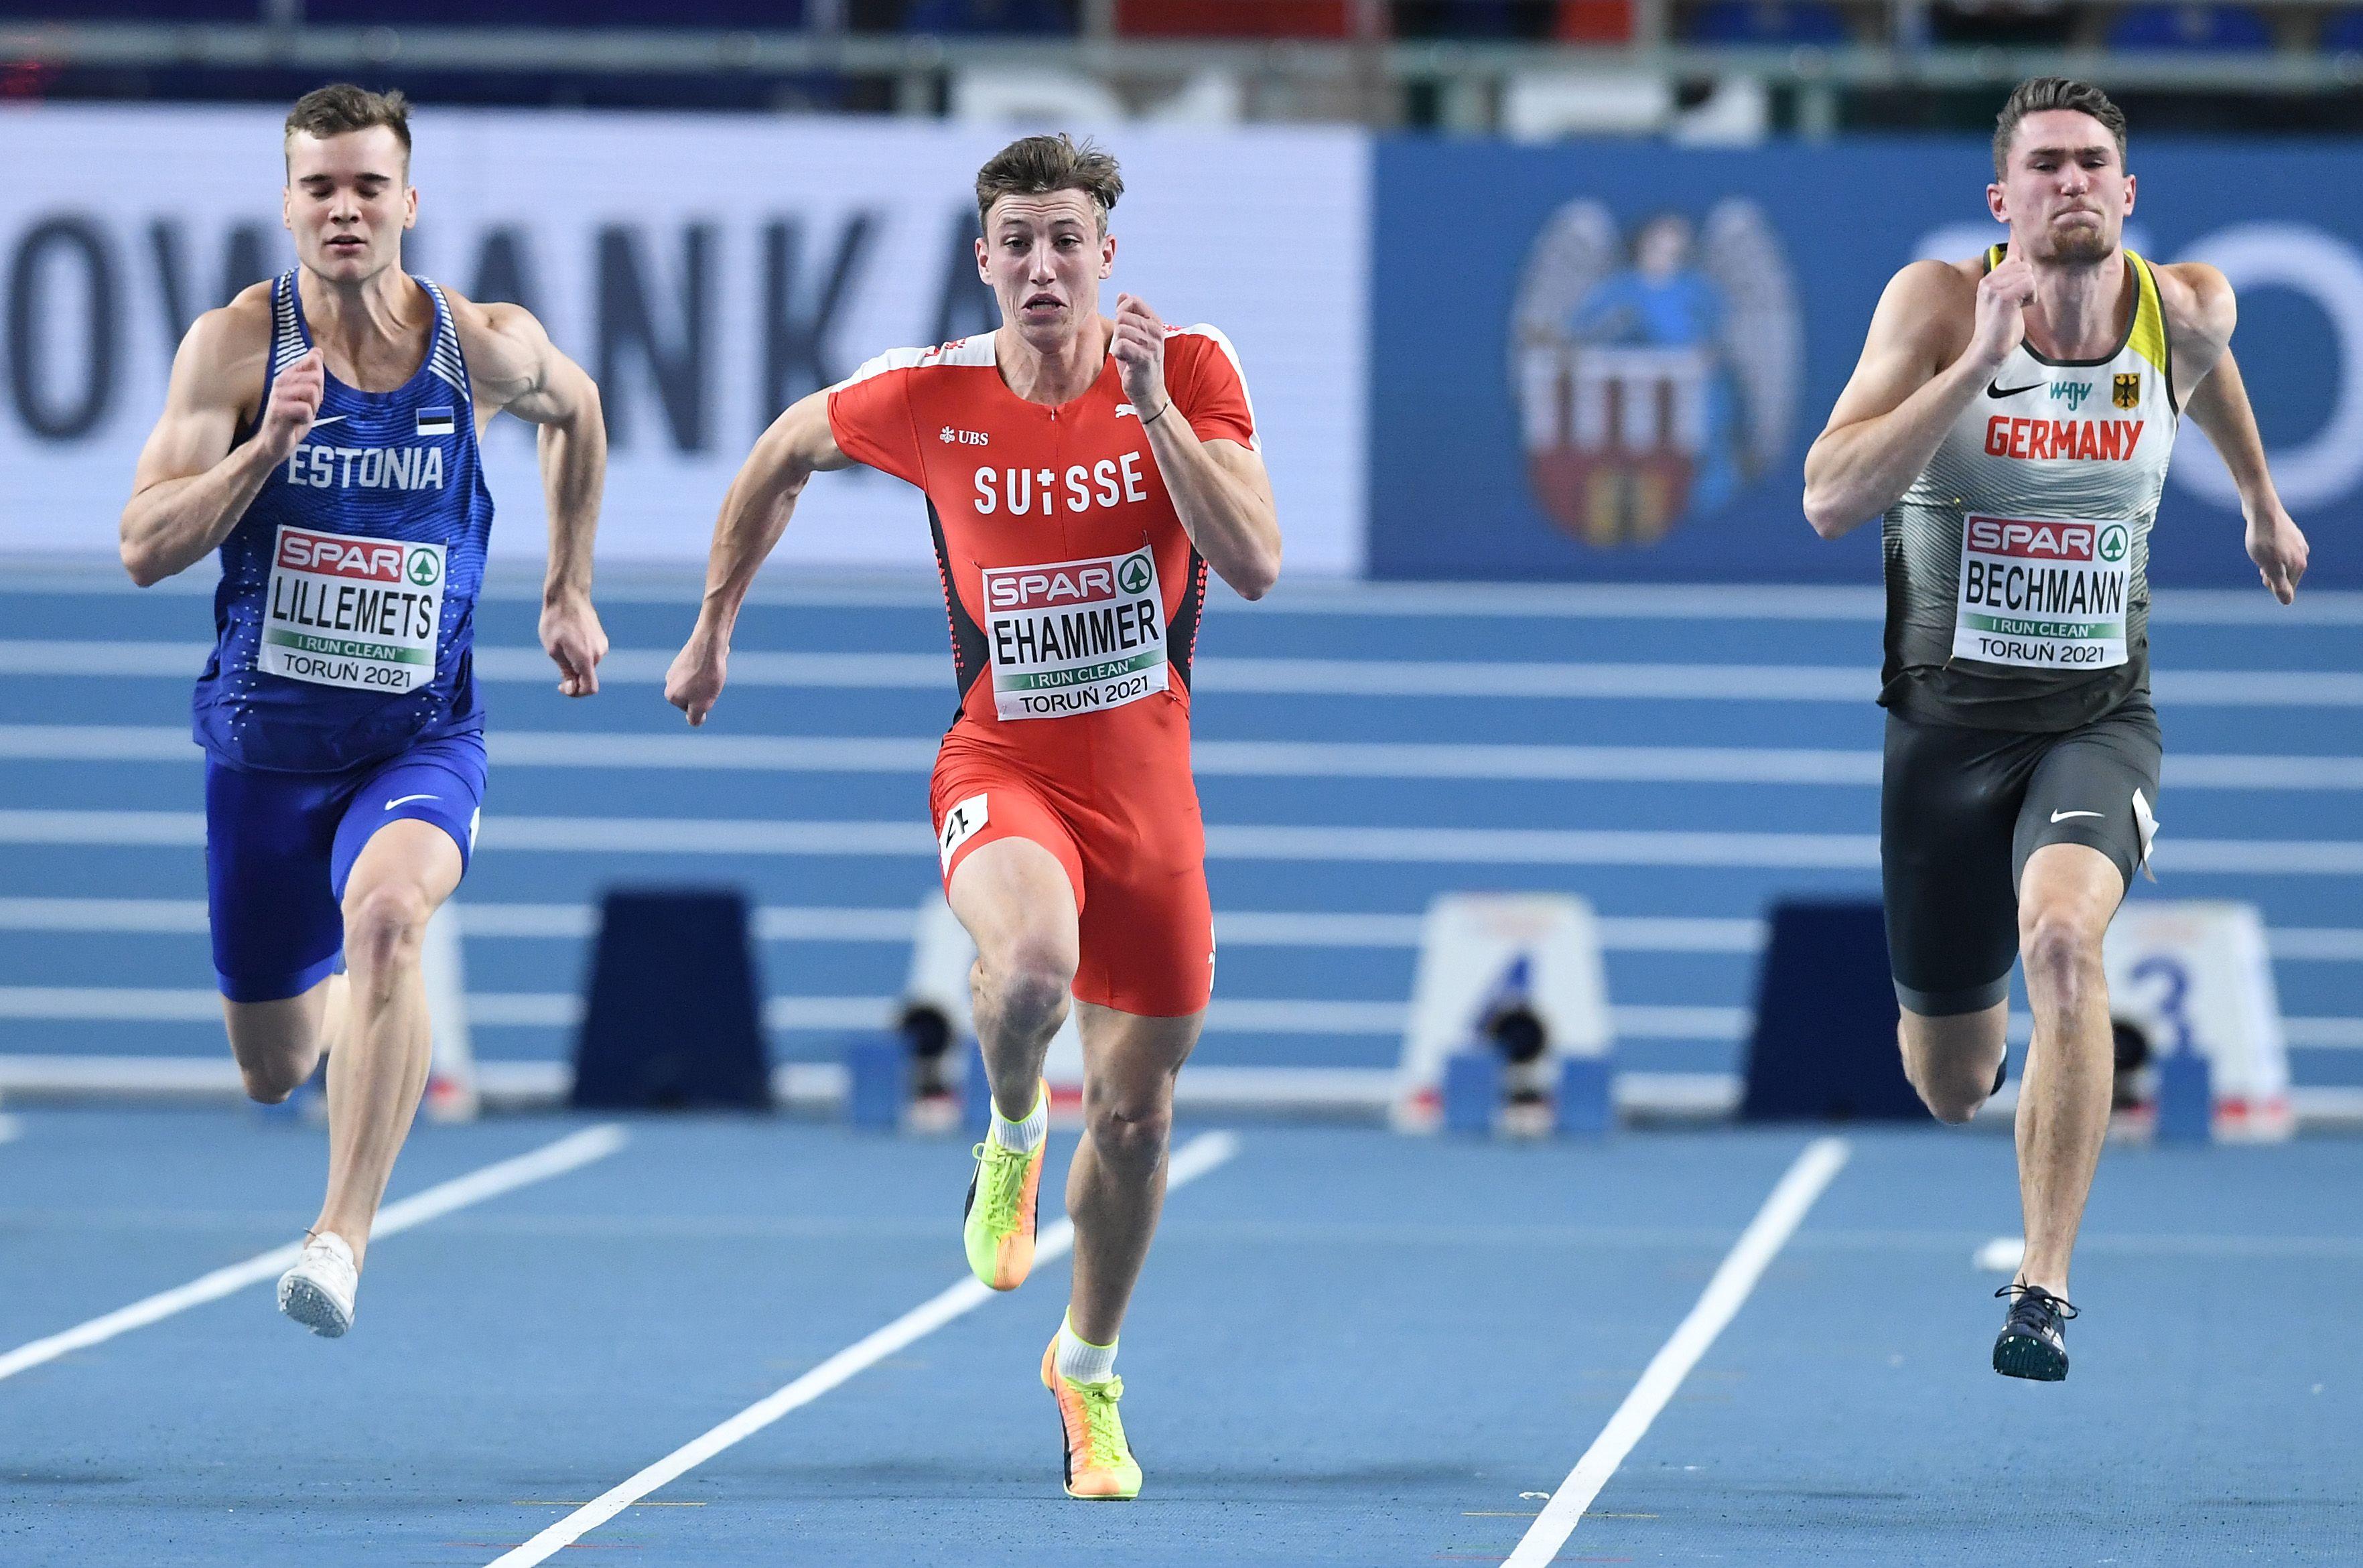 Simon Ehammer competes at the 2021 European Indoor Championships in Torun